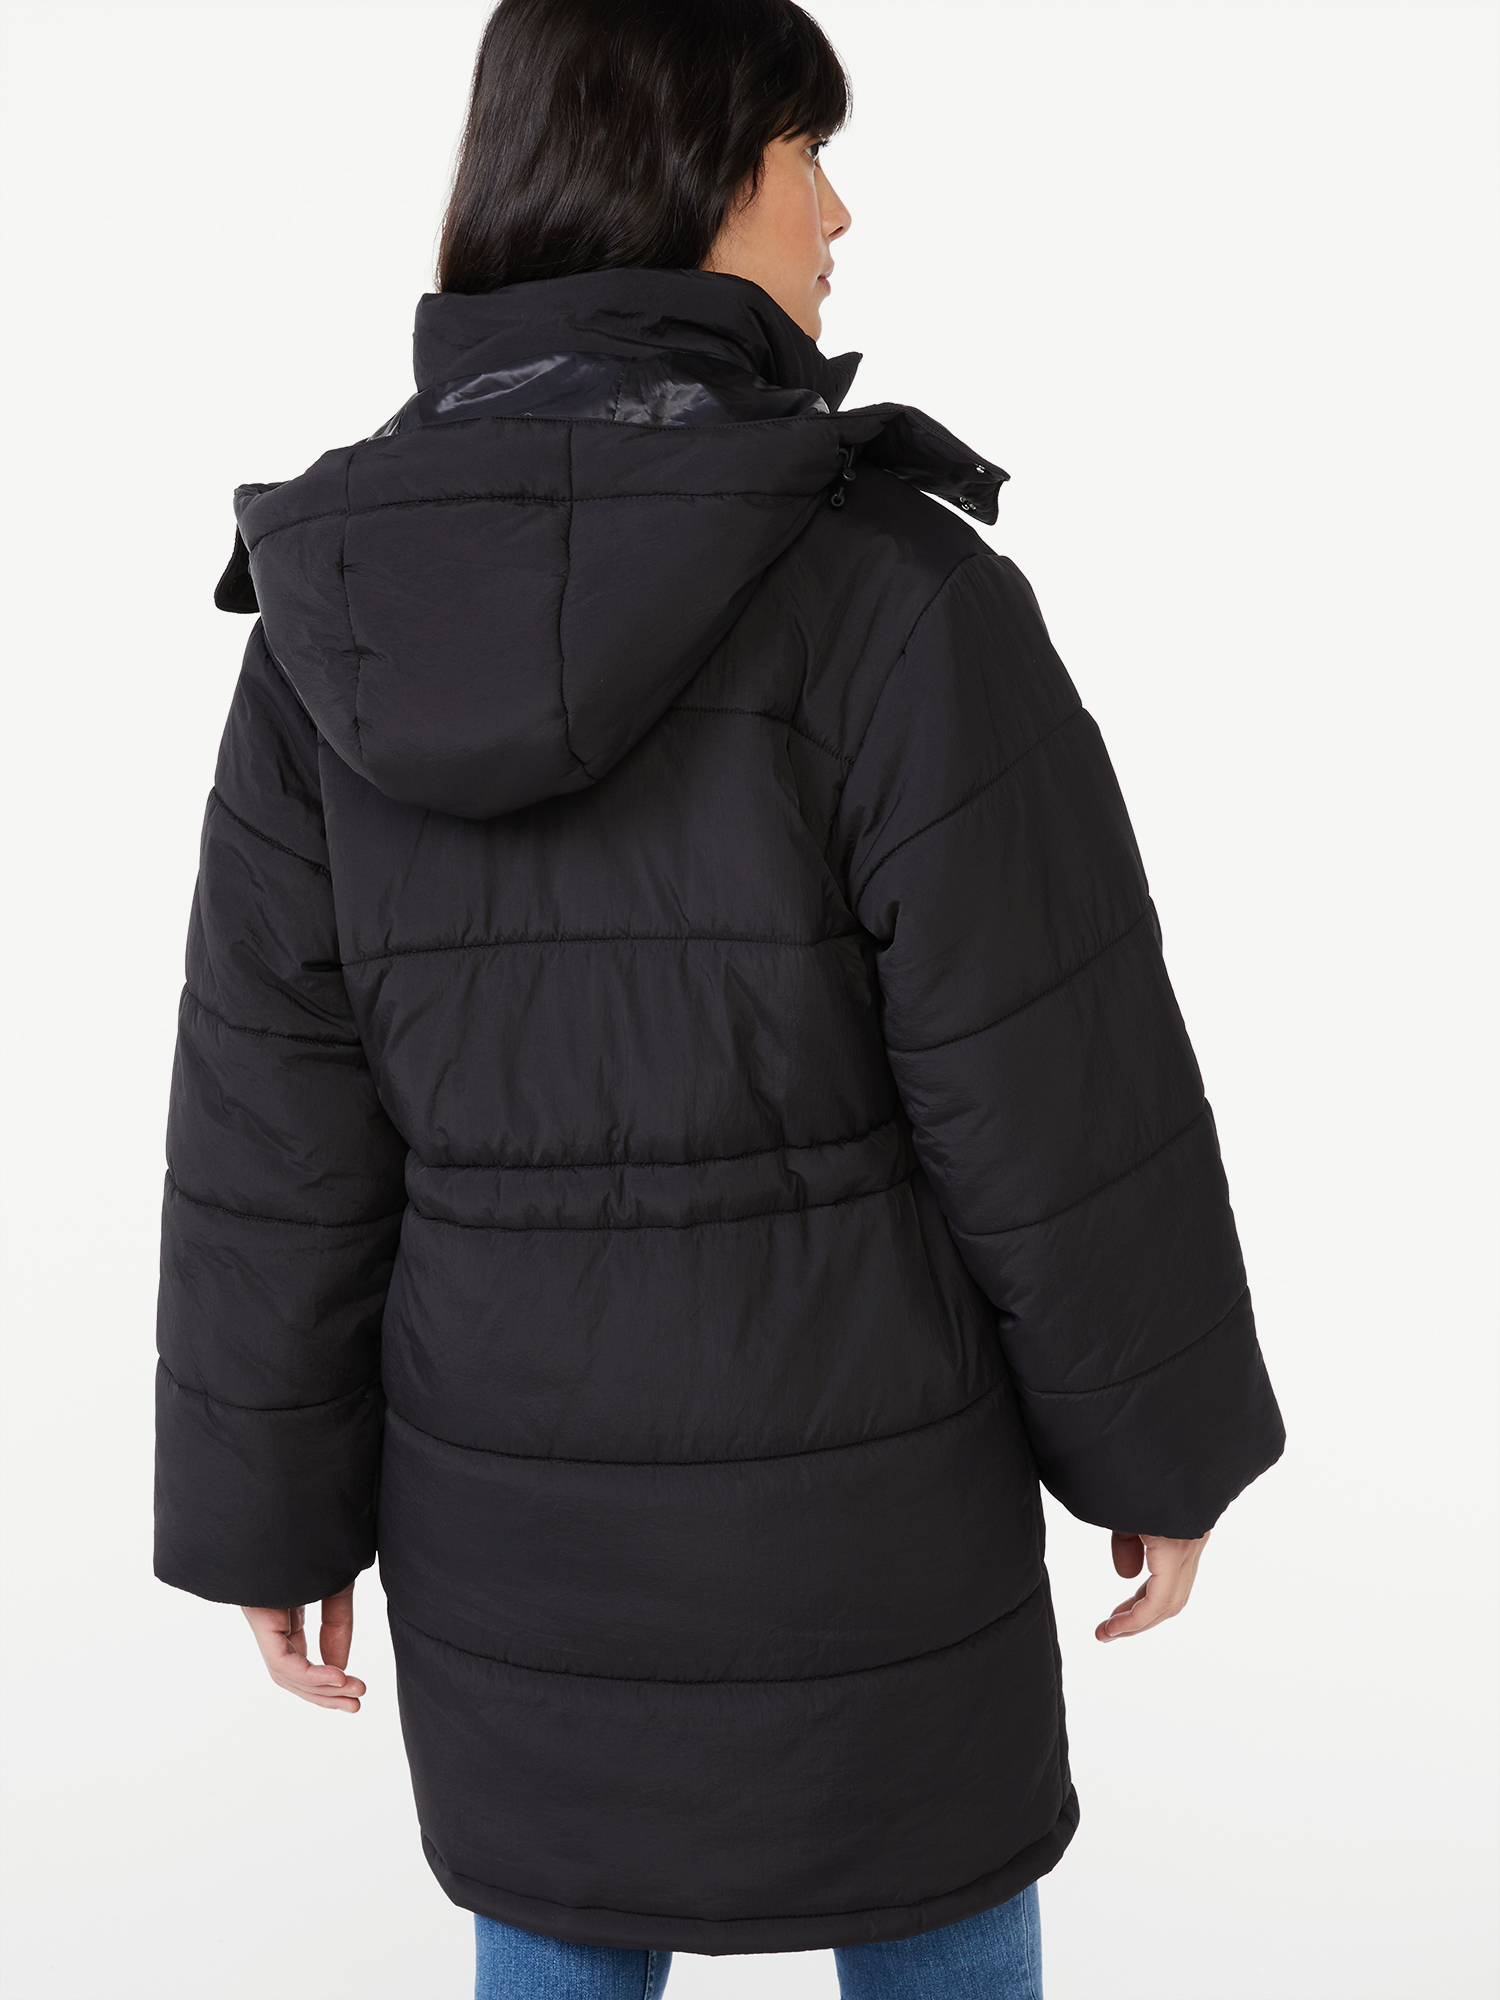 Free Assembly Women's Long Puffer Jacket, Midweight - image 3 of 5